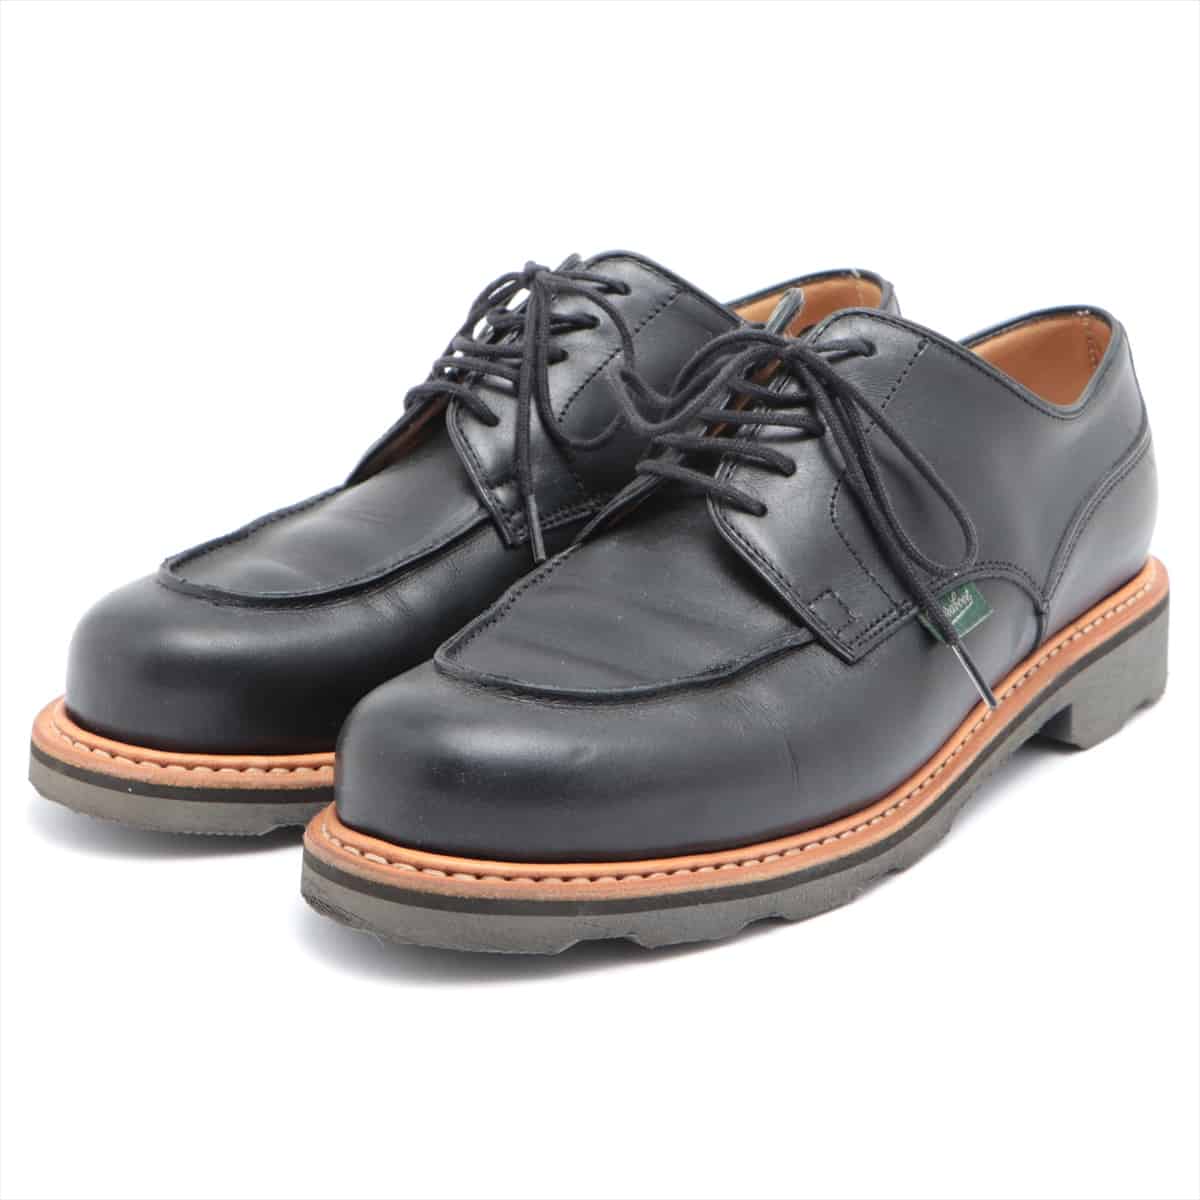 Paraboot Leather Leather shoes 4 Ladies' Black BEAUTY AND YOUTH United Arrows bespoke